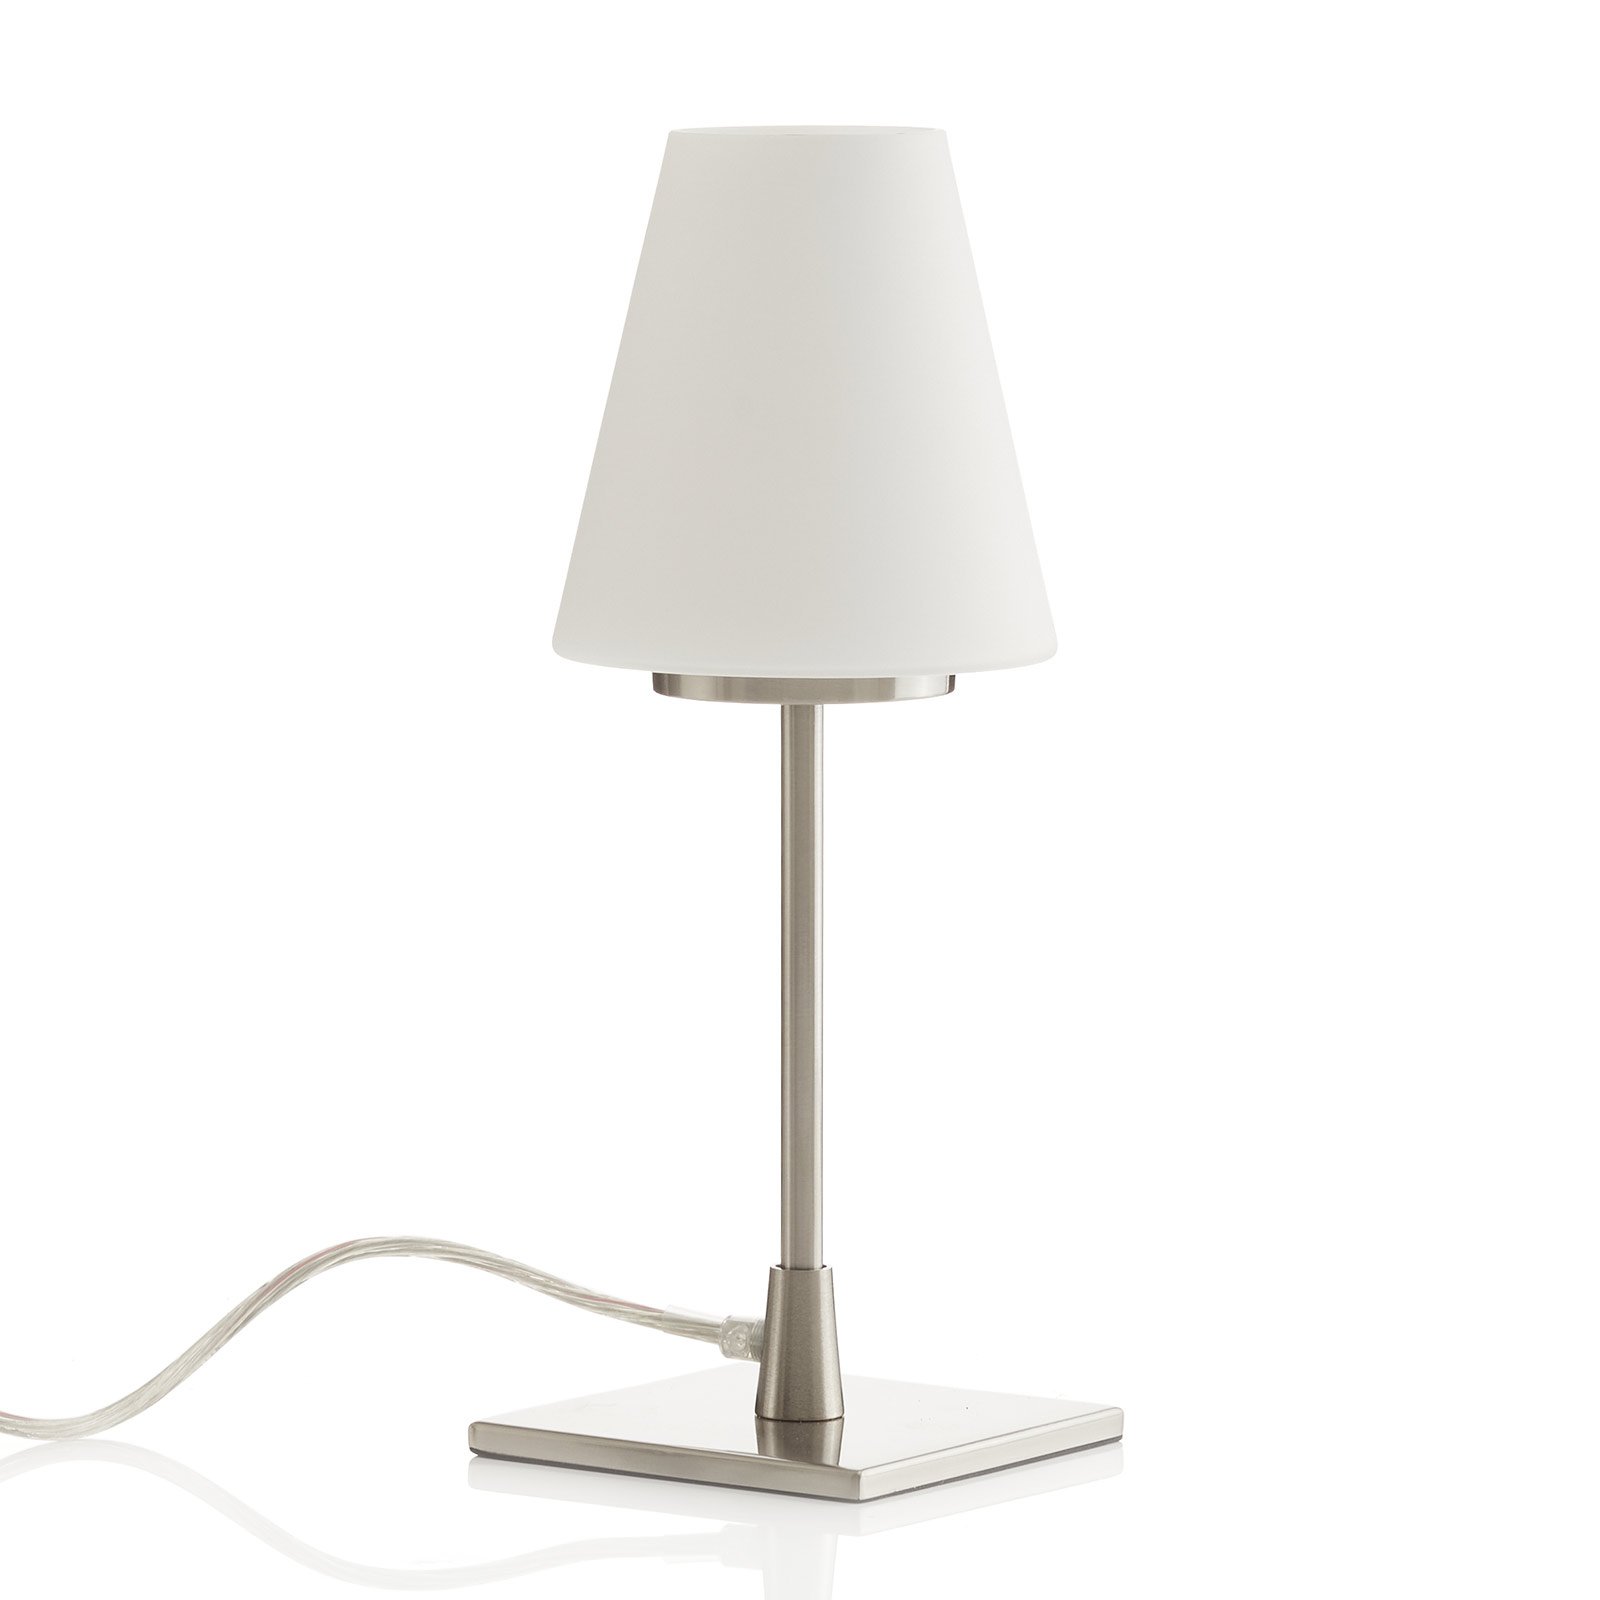 Lucy Big table lamp with a touch function, white